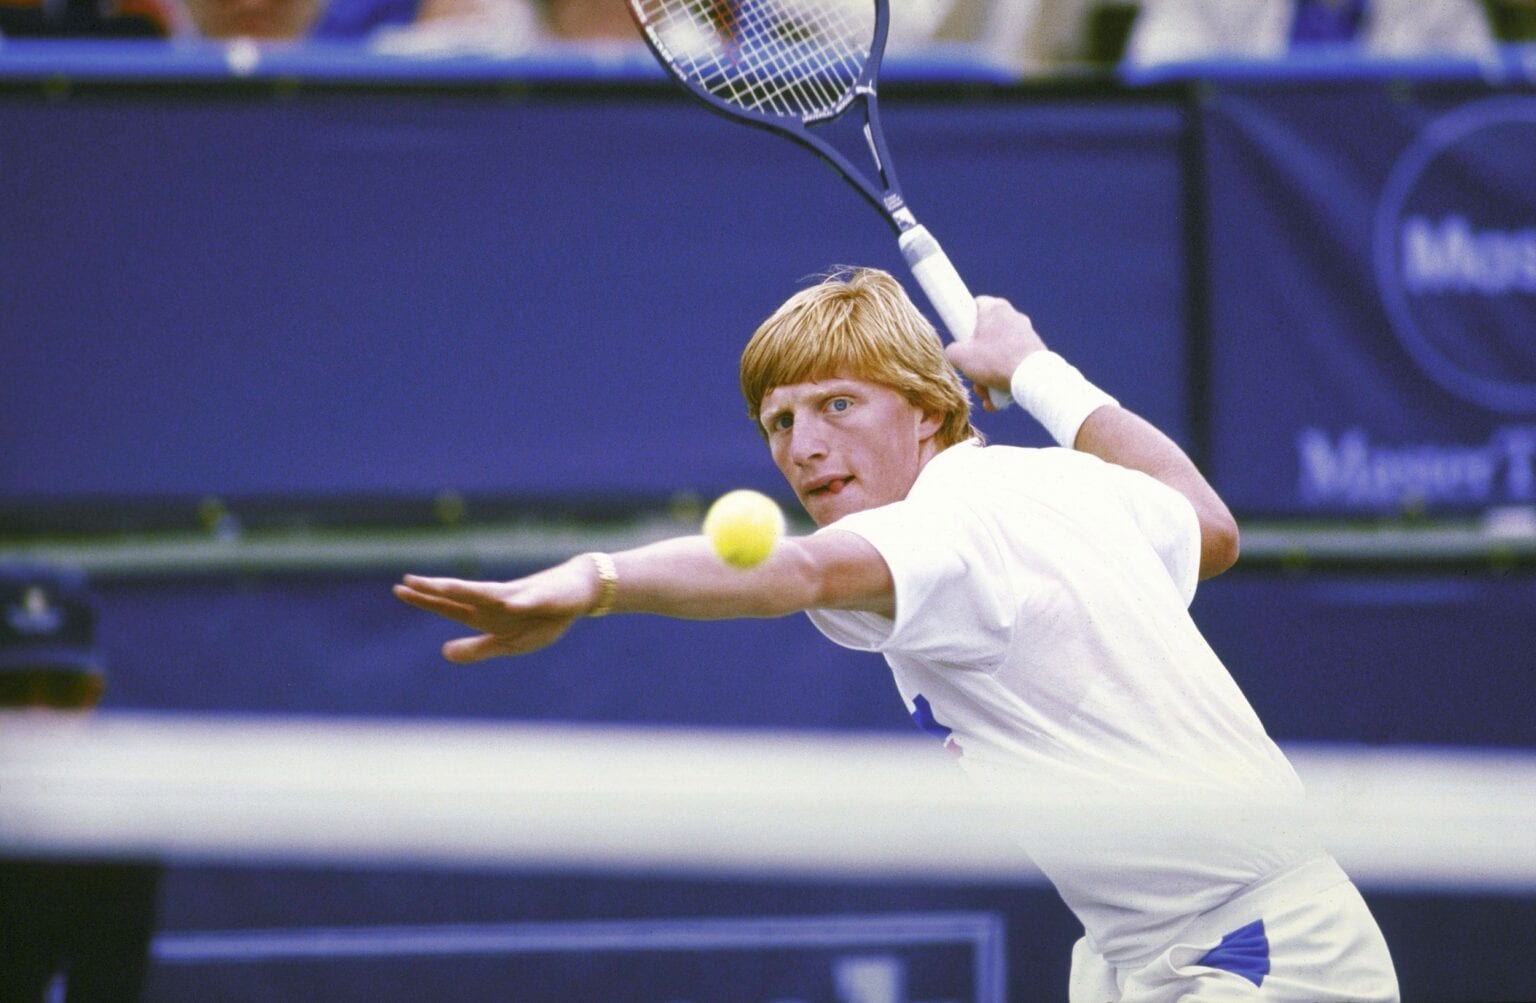 Tennis champ Boris Becker takes aim at a ball in archival footage from sports docuseries 